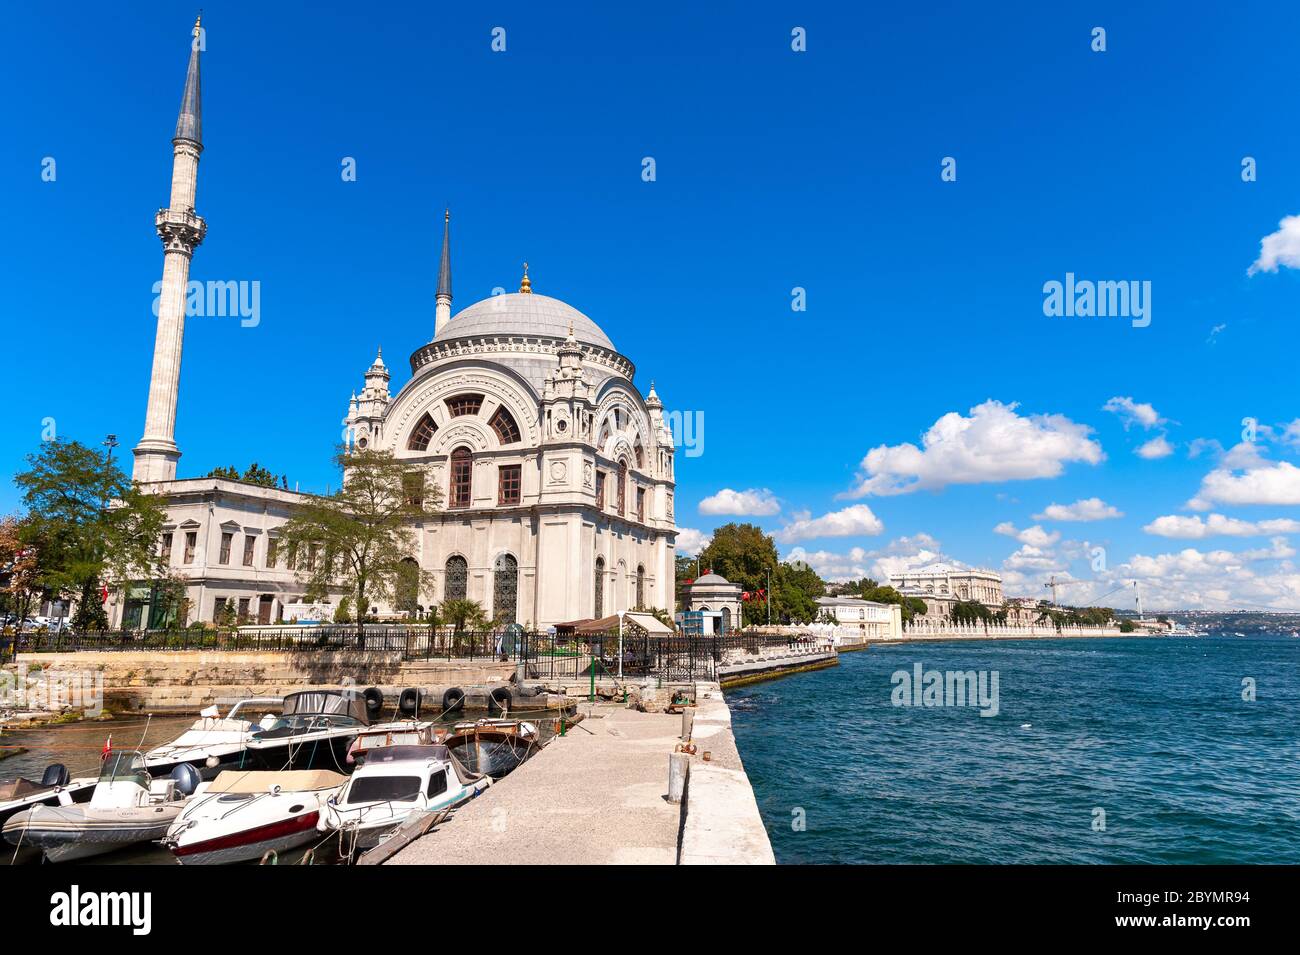 Dolmabahce Mosque on the banks of the Bosphorus, Istanbul, Turkey Stock Photo